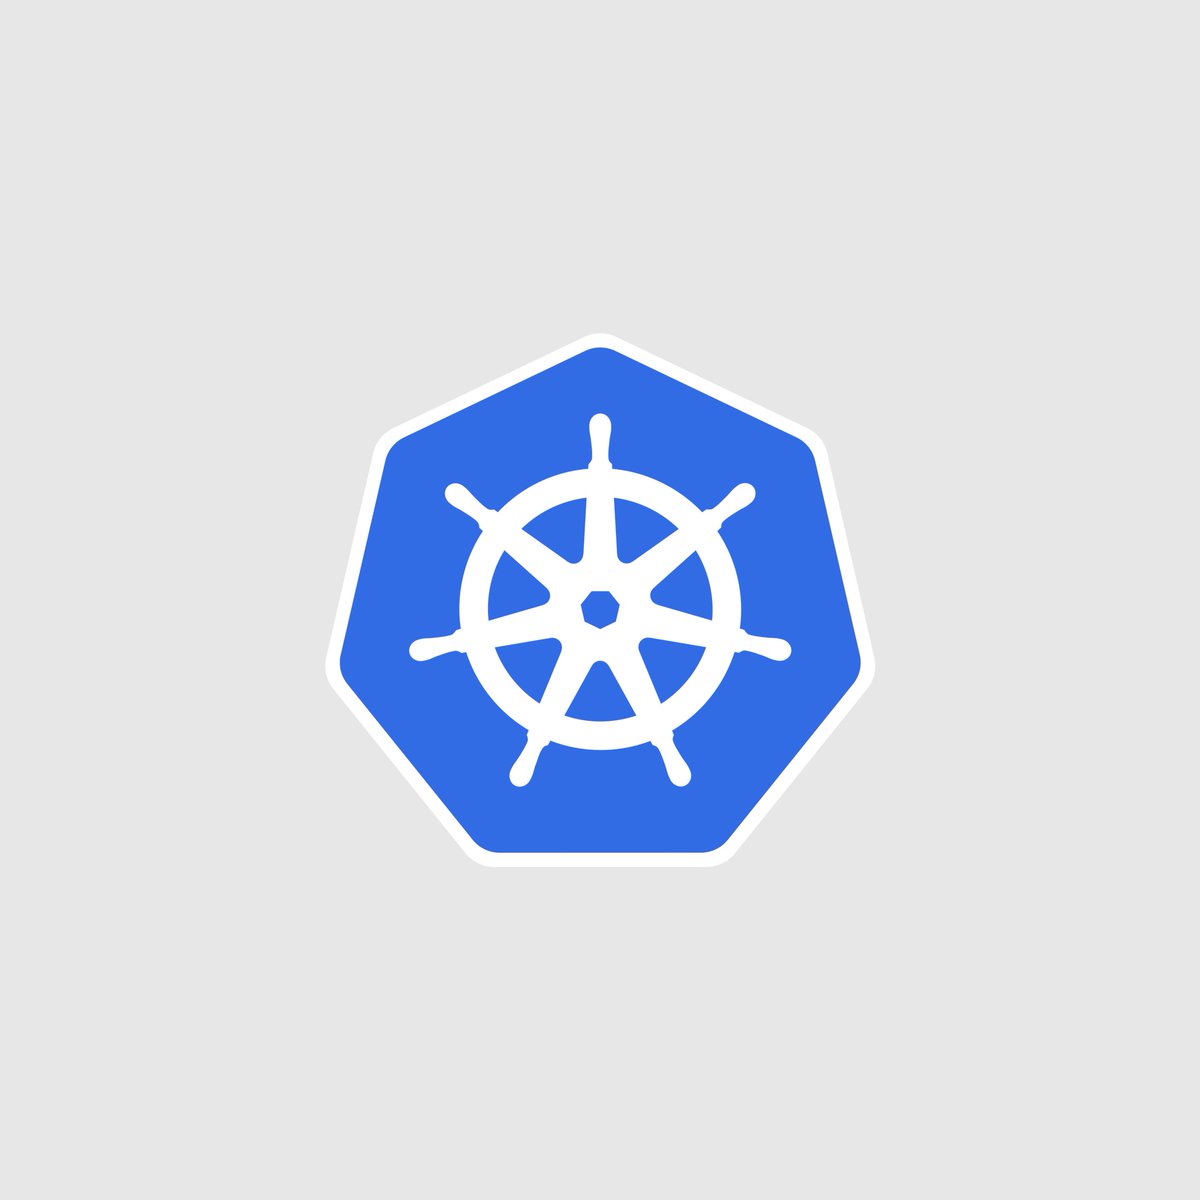 Let's Learn about 'Kubernetes ' with iLearn for Free!!! Enroll Now: j.mp/3bIiVMq #Kubernetes #OpenSource #ComputerApplication #iLearn #WhereLearningisFree